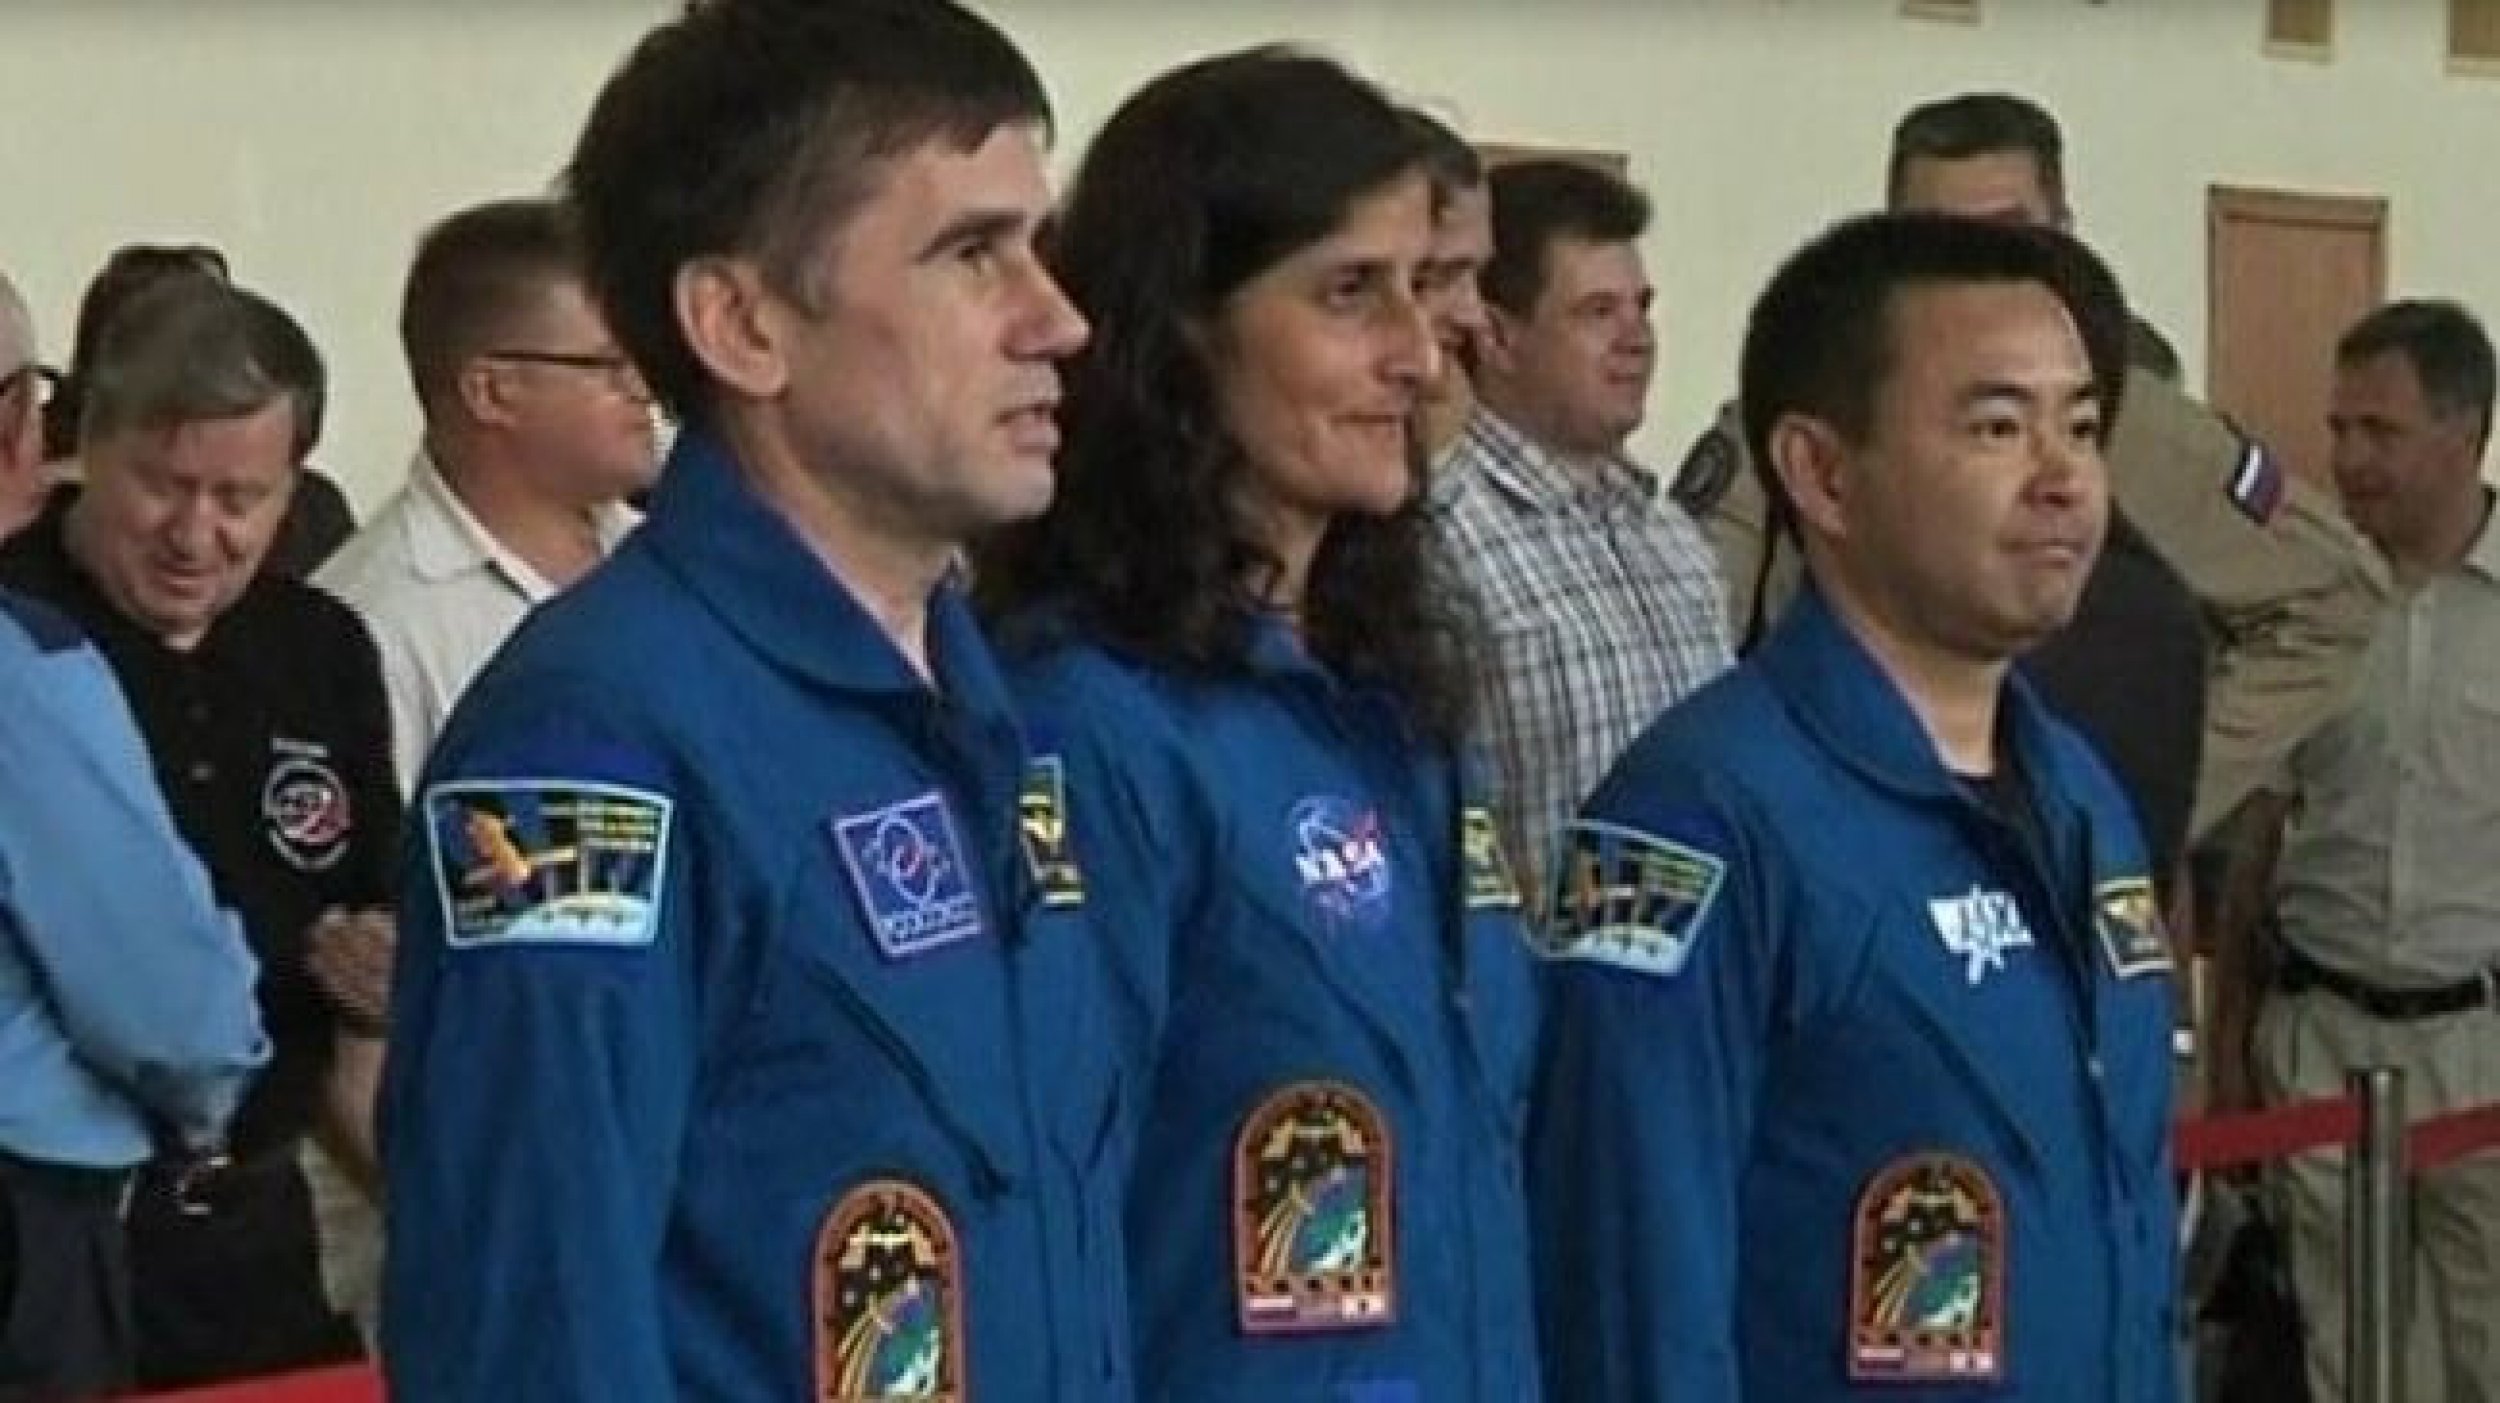 New ISS Crew Trains Ahead of Space Launch